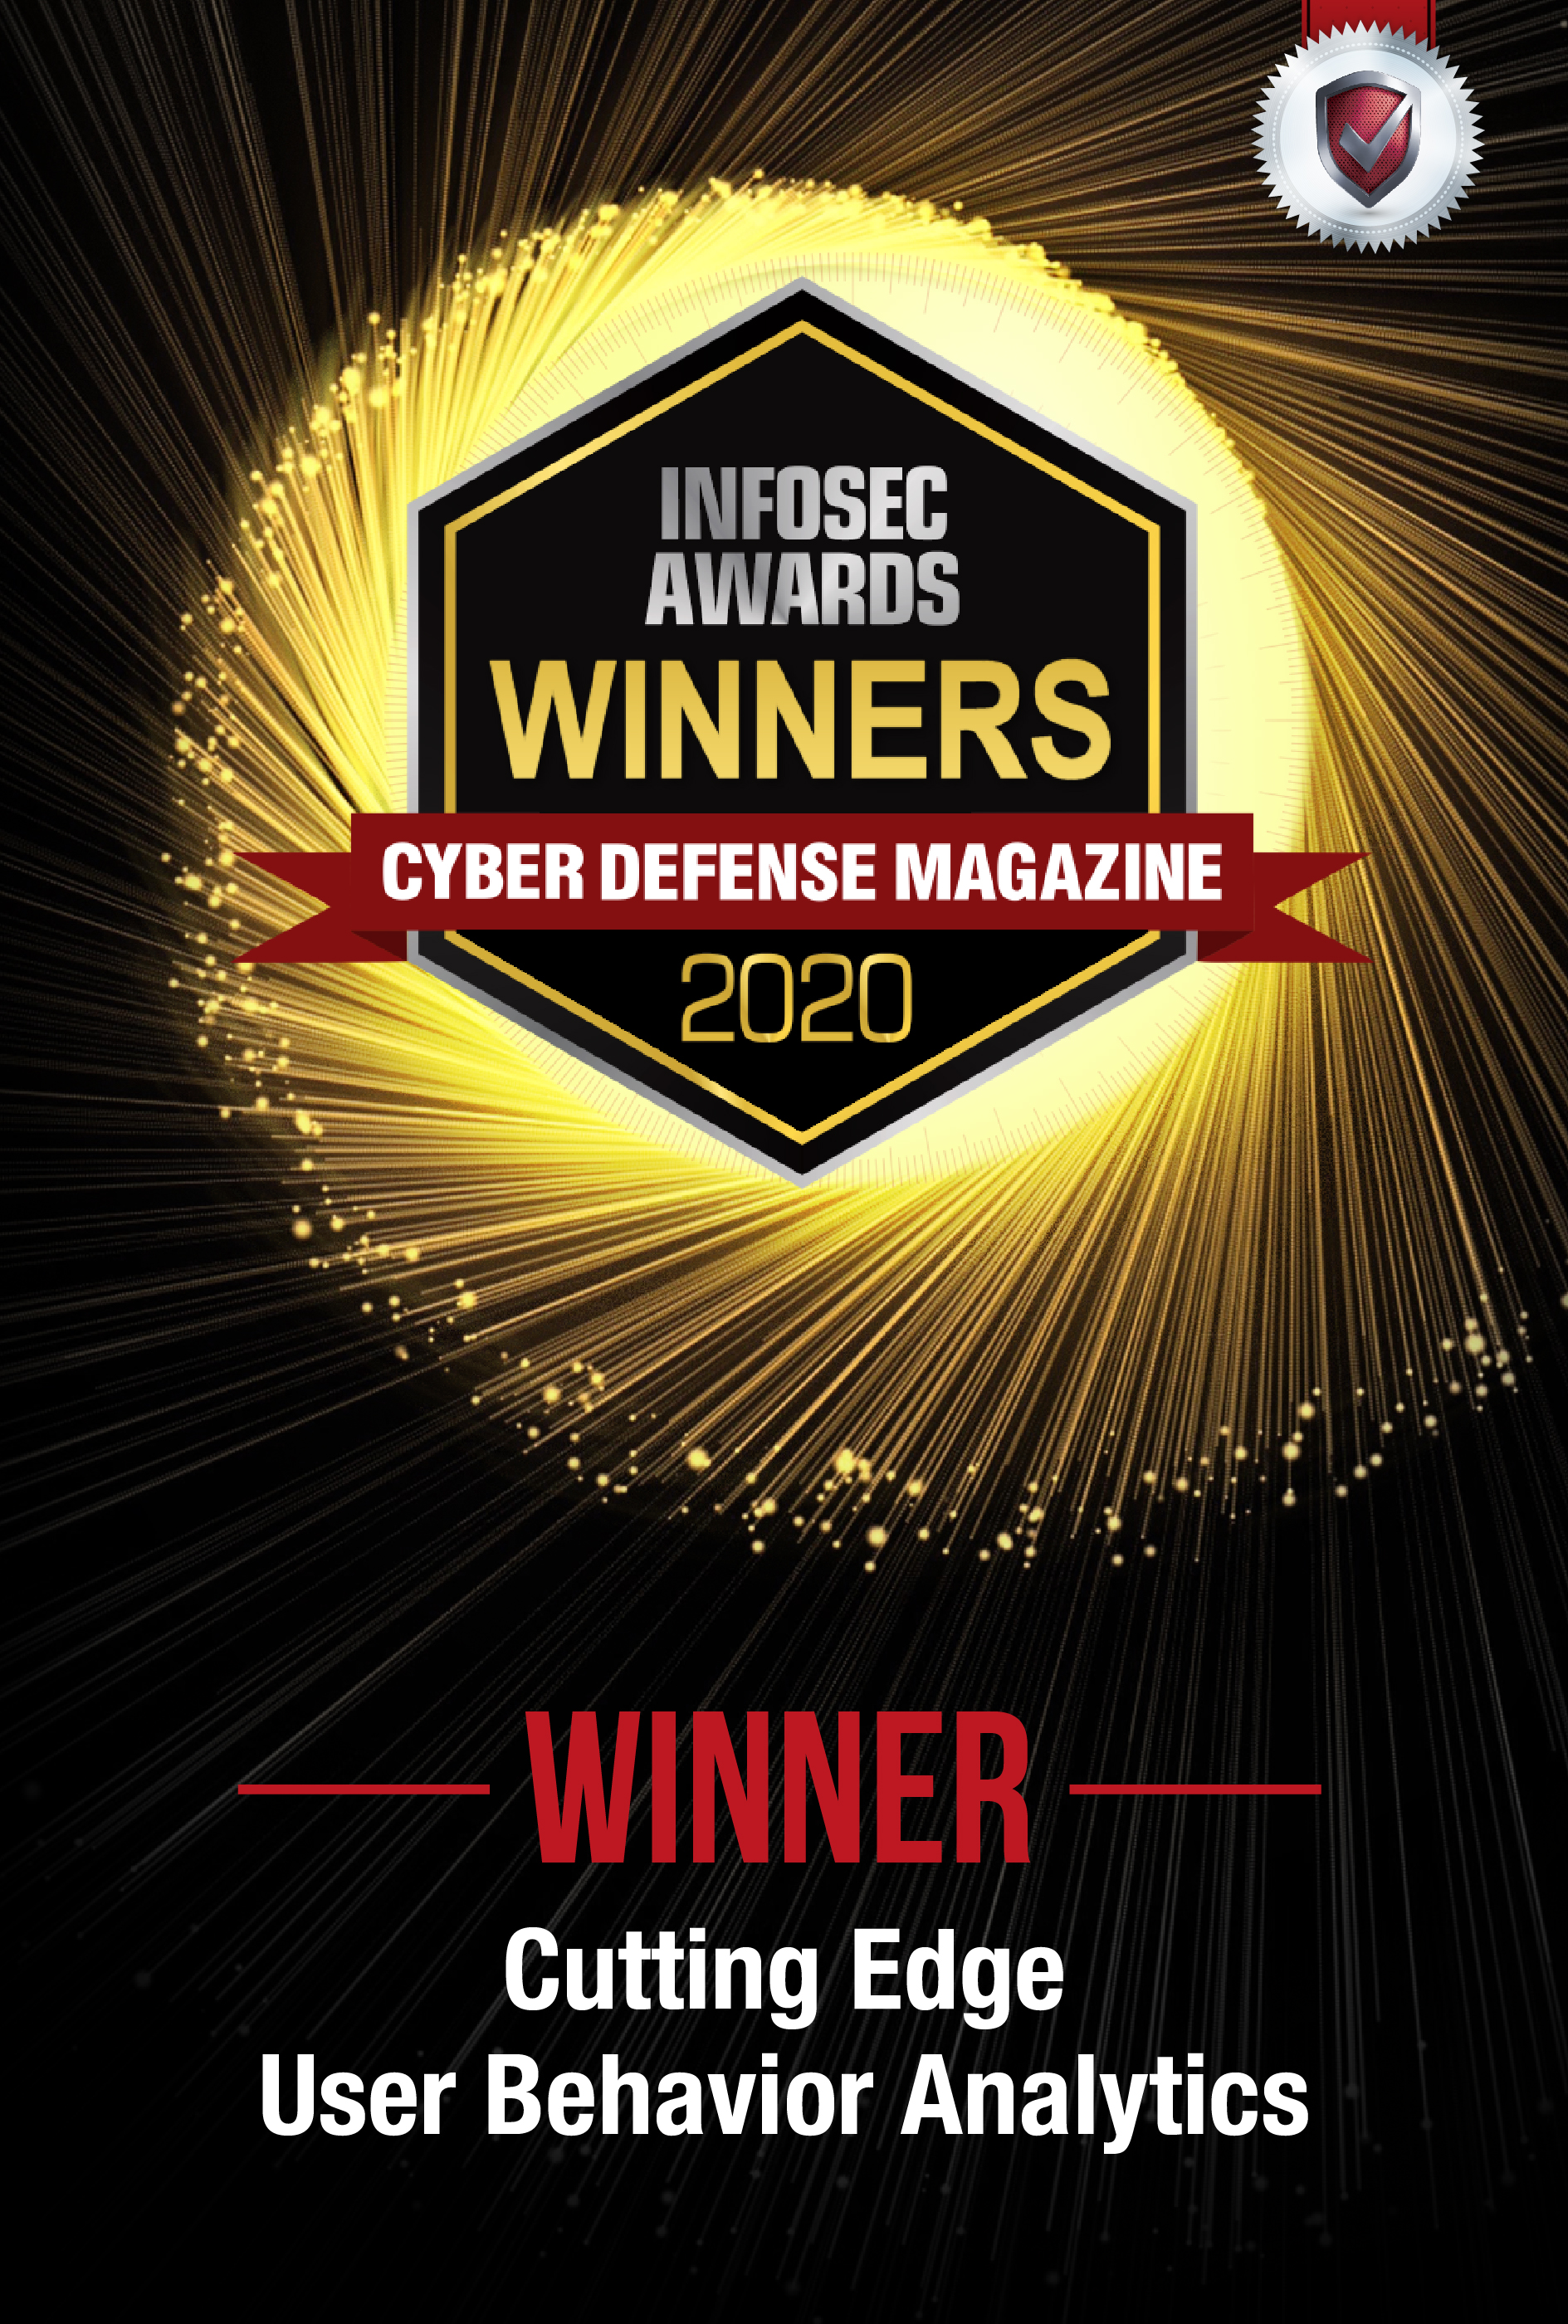 LinkShadow Named Winner of the Coveted InfoSec Awards during RSA Conference 2020